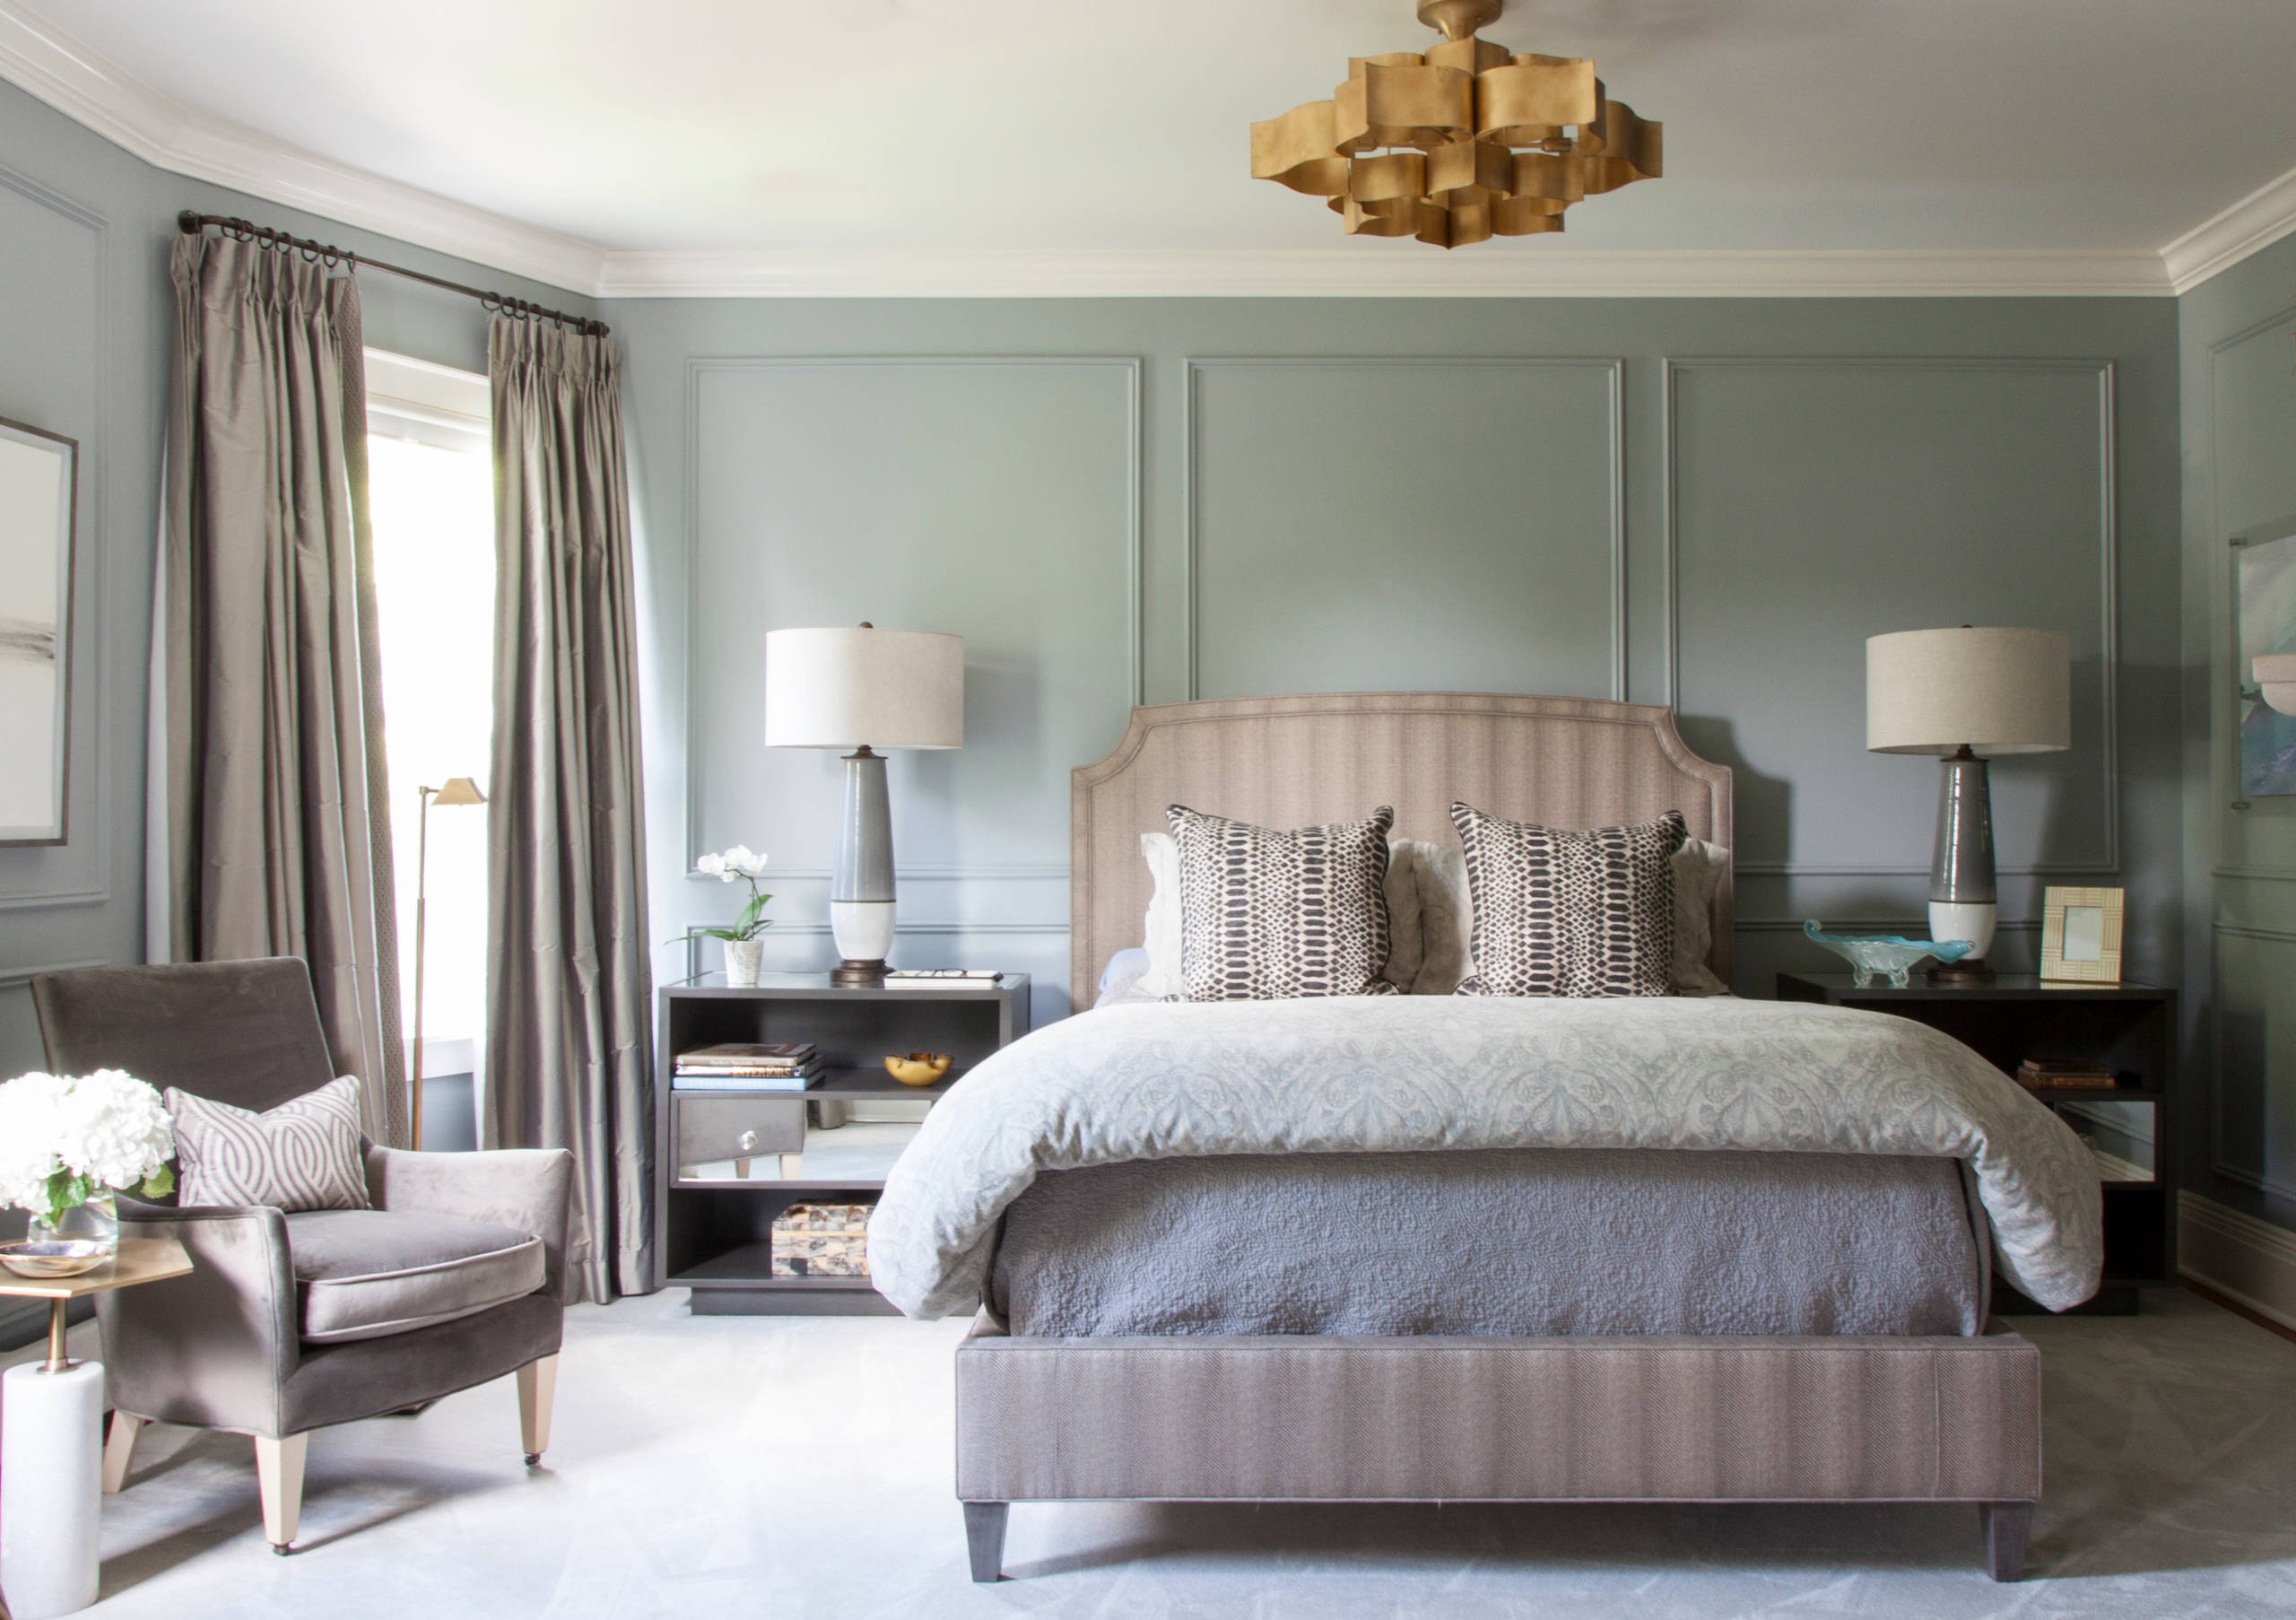 Tan And Blue Bedroom Ideas And Photos Houzz